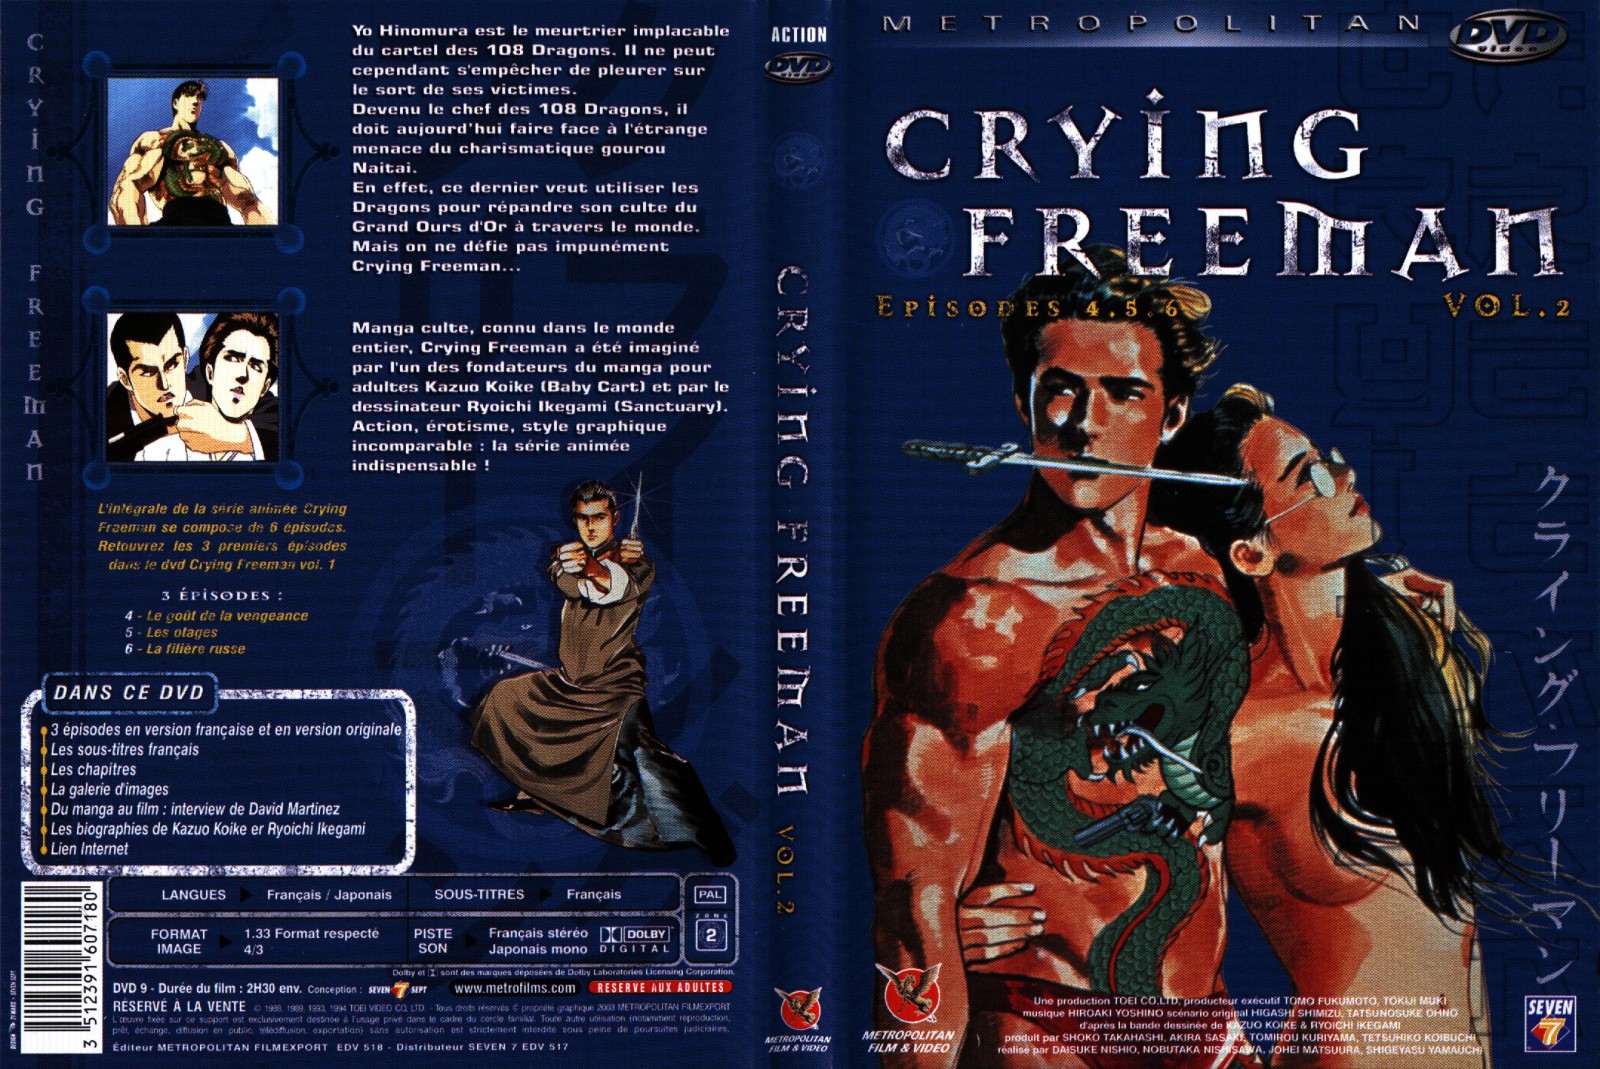 Jaquette DVD Crying freeman vol 2